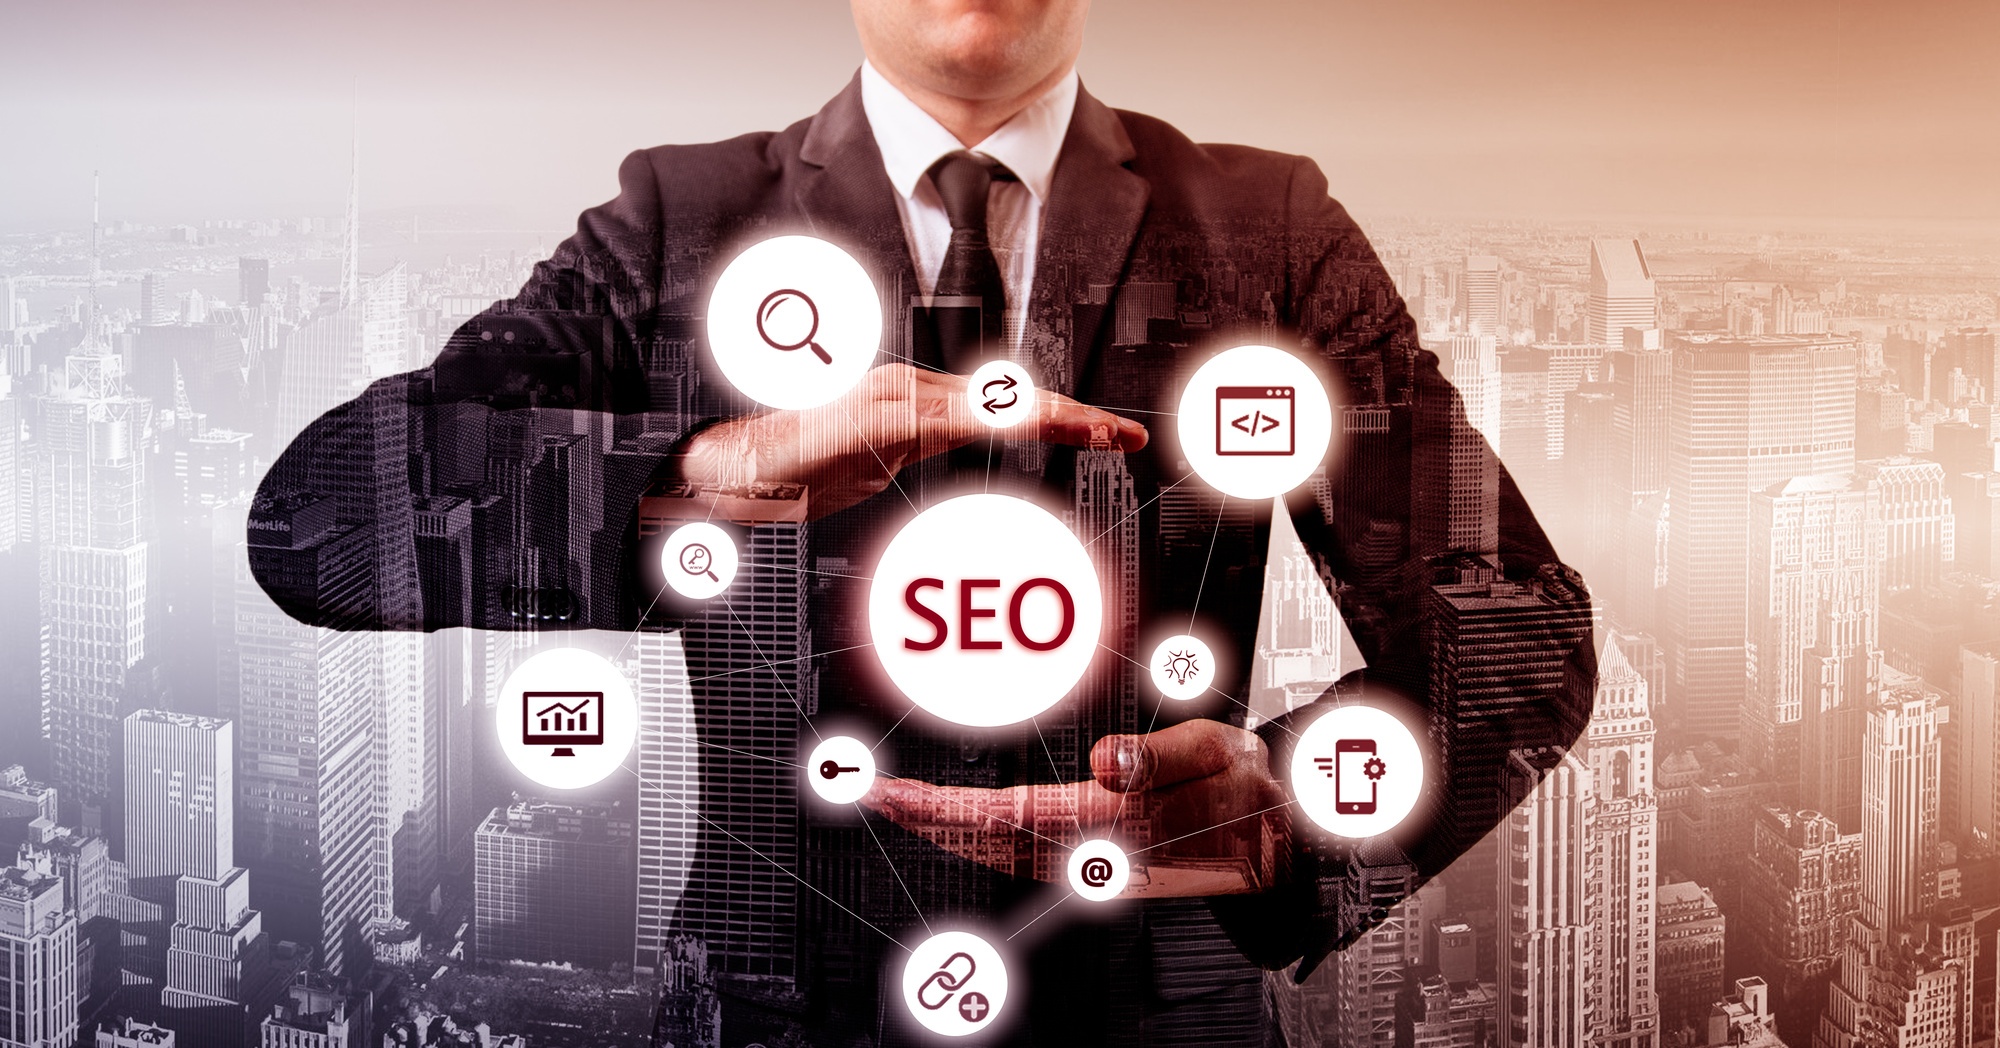 8 Questions You Need Ask SEO Consulting Services Before Hiring One